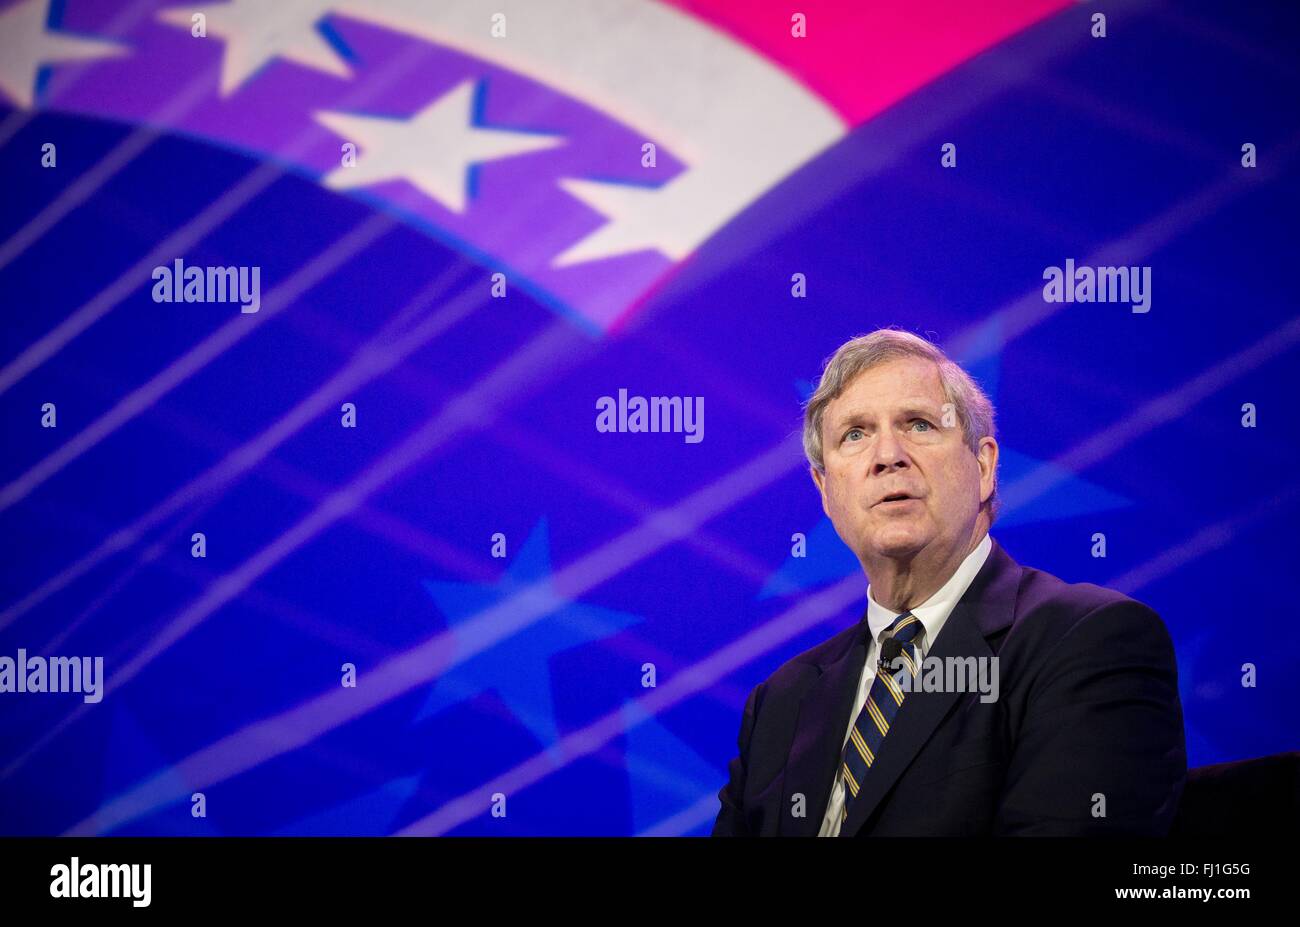 US Agriculture Secretary Tom Vilsack talks about various factors of chronic poverty during the National Association of Counties meeting at the Washington Marriott Wardman Park February 23, 2016 in Washington, DC. Stock Photo